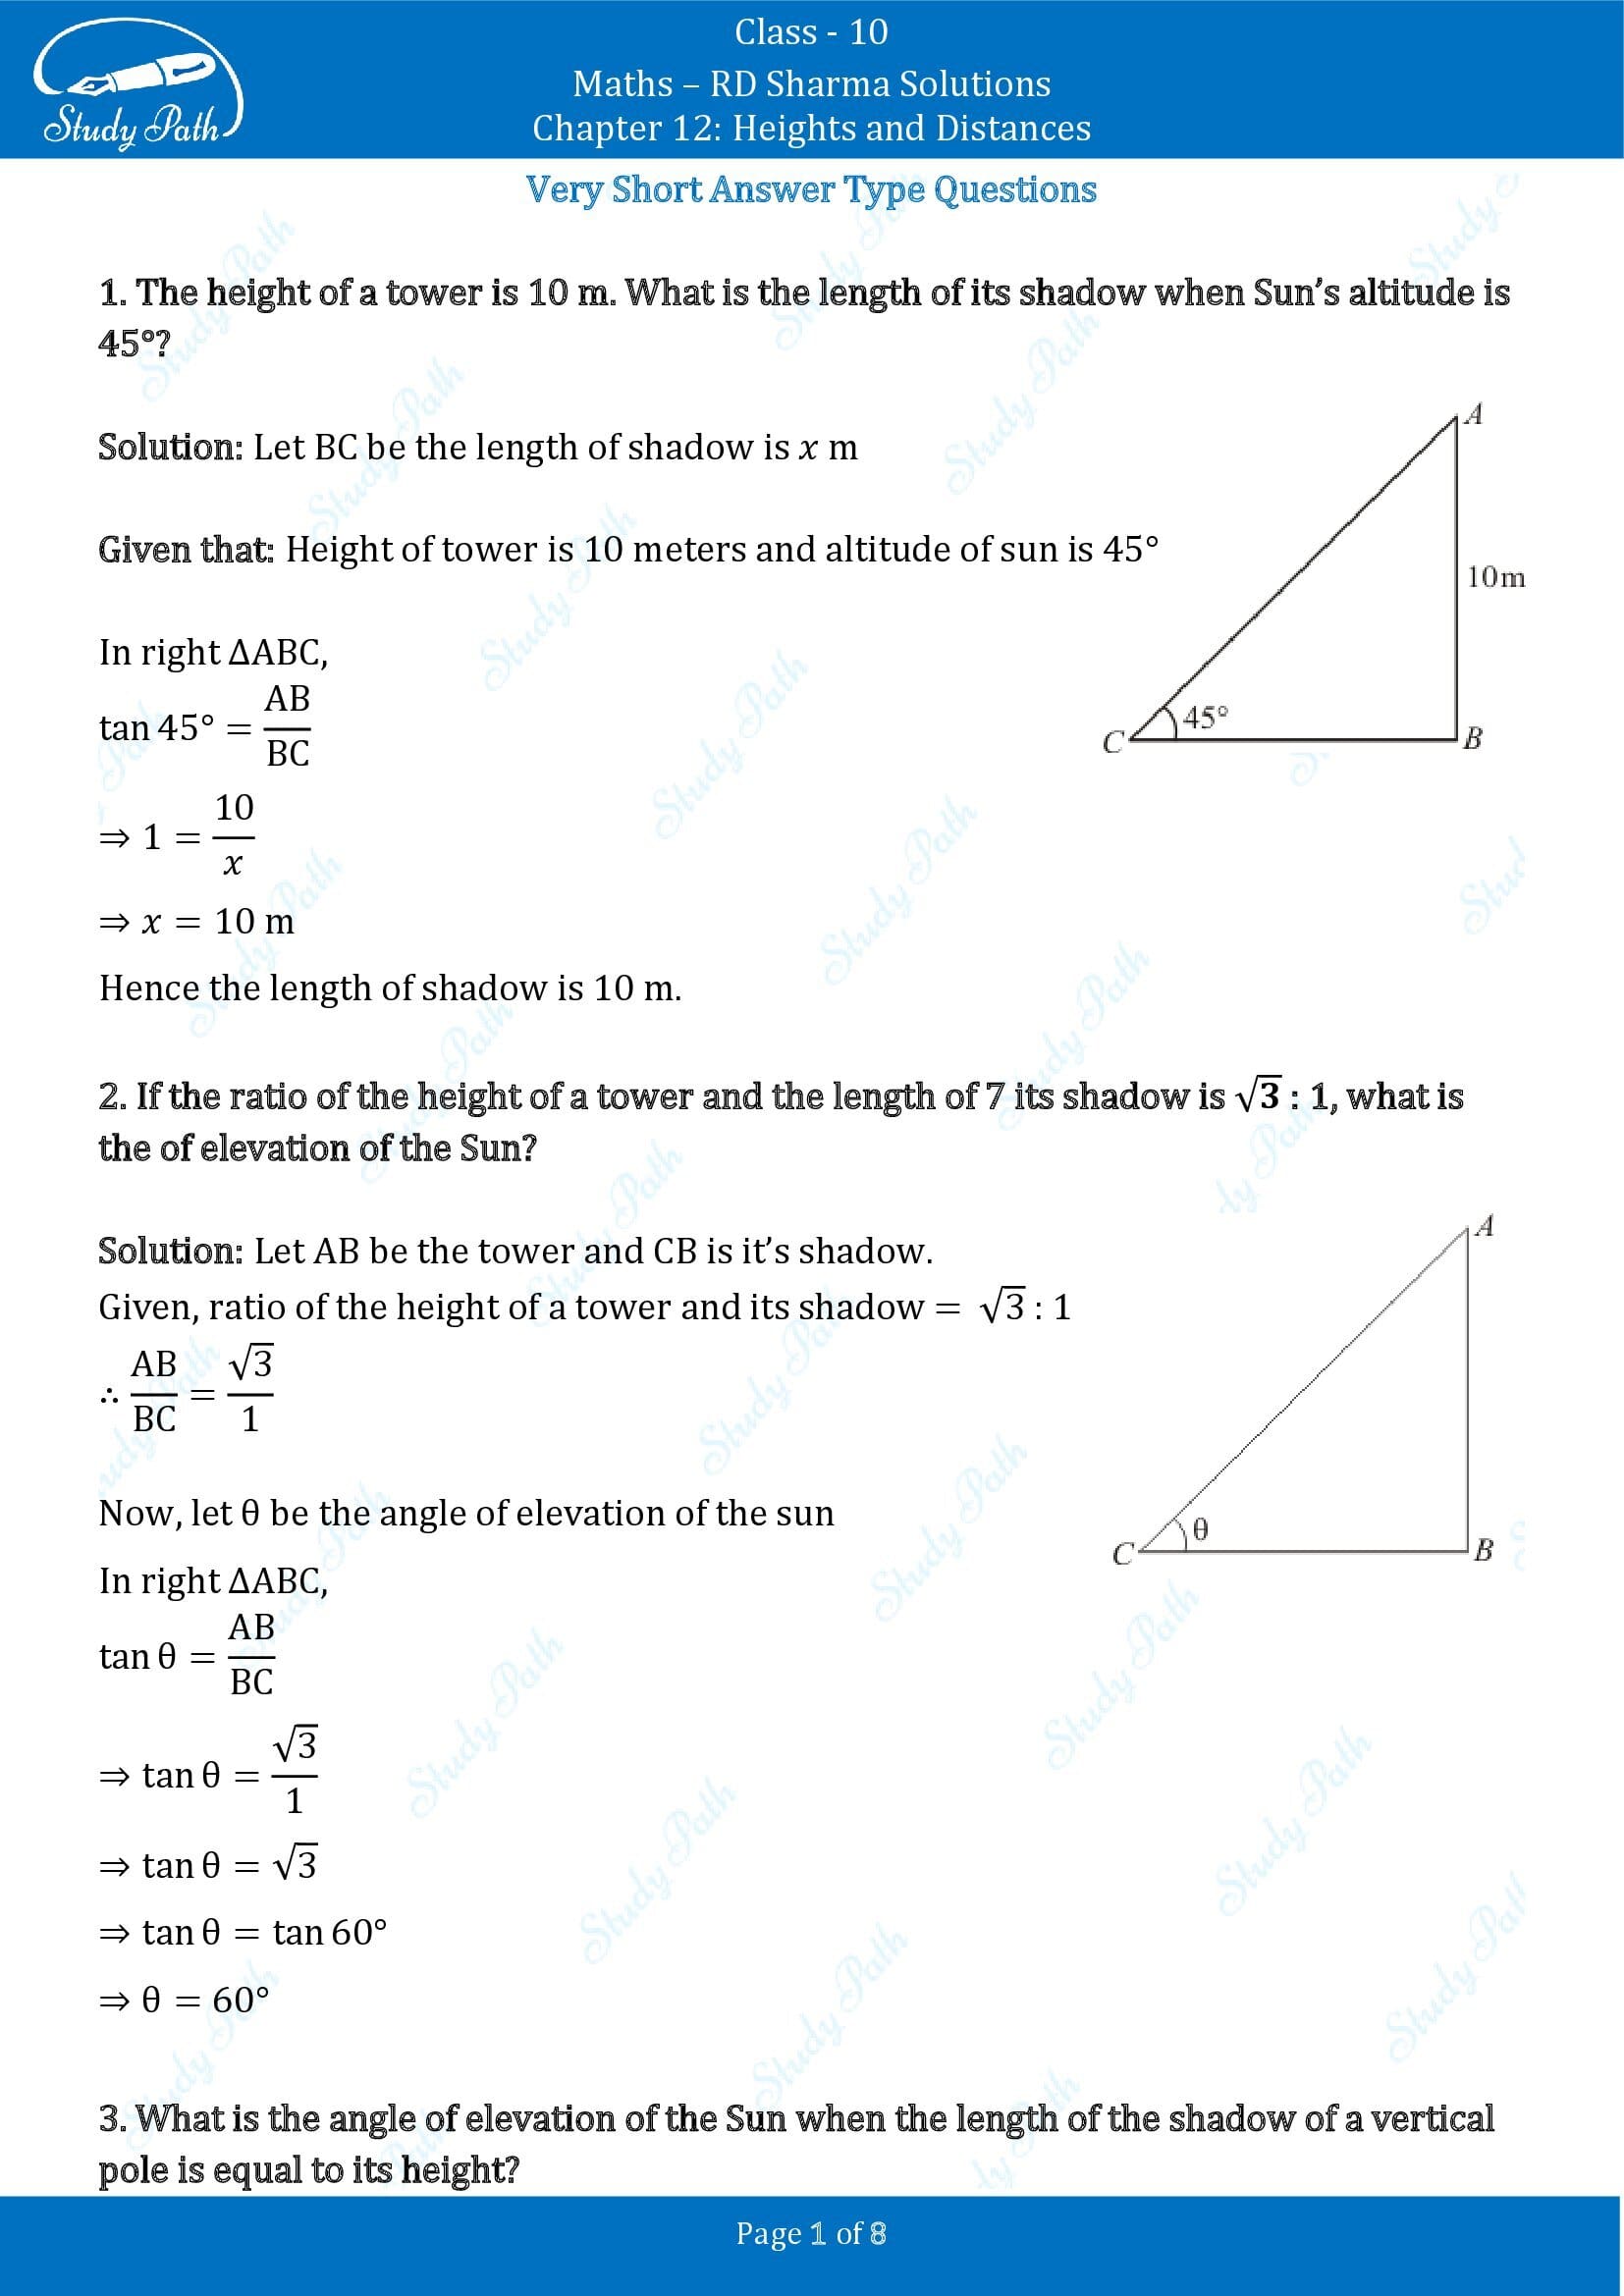 RD Sharma Solutions Class 10 Chapter 12 Heights and Distances Very Short Answer Type Questions VSAQs 00001